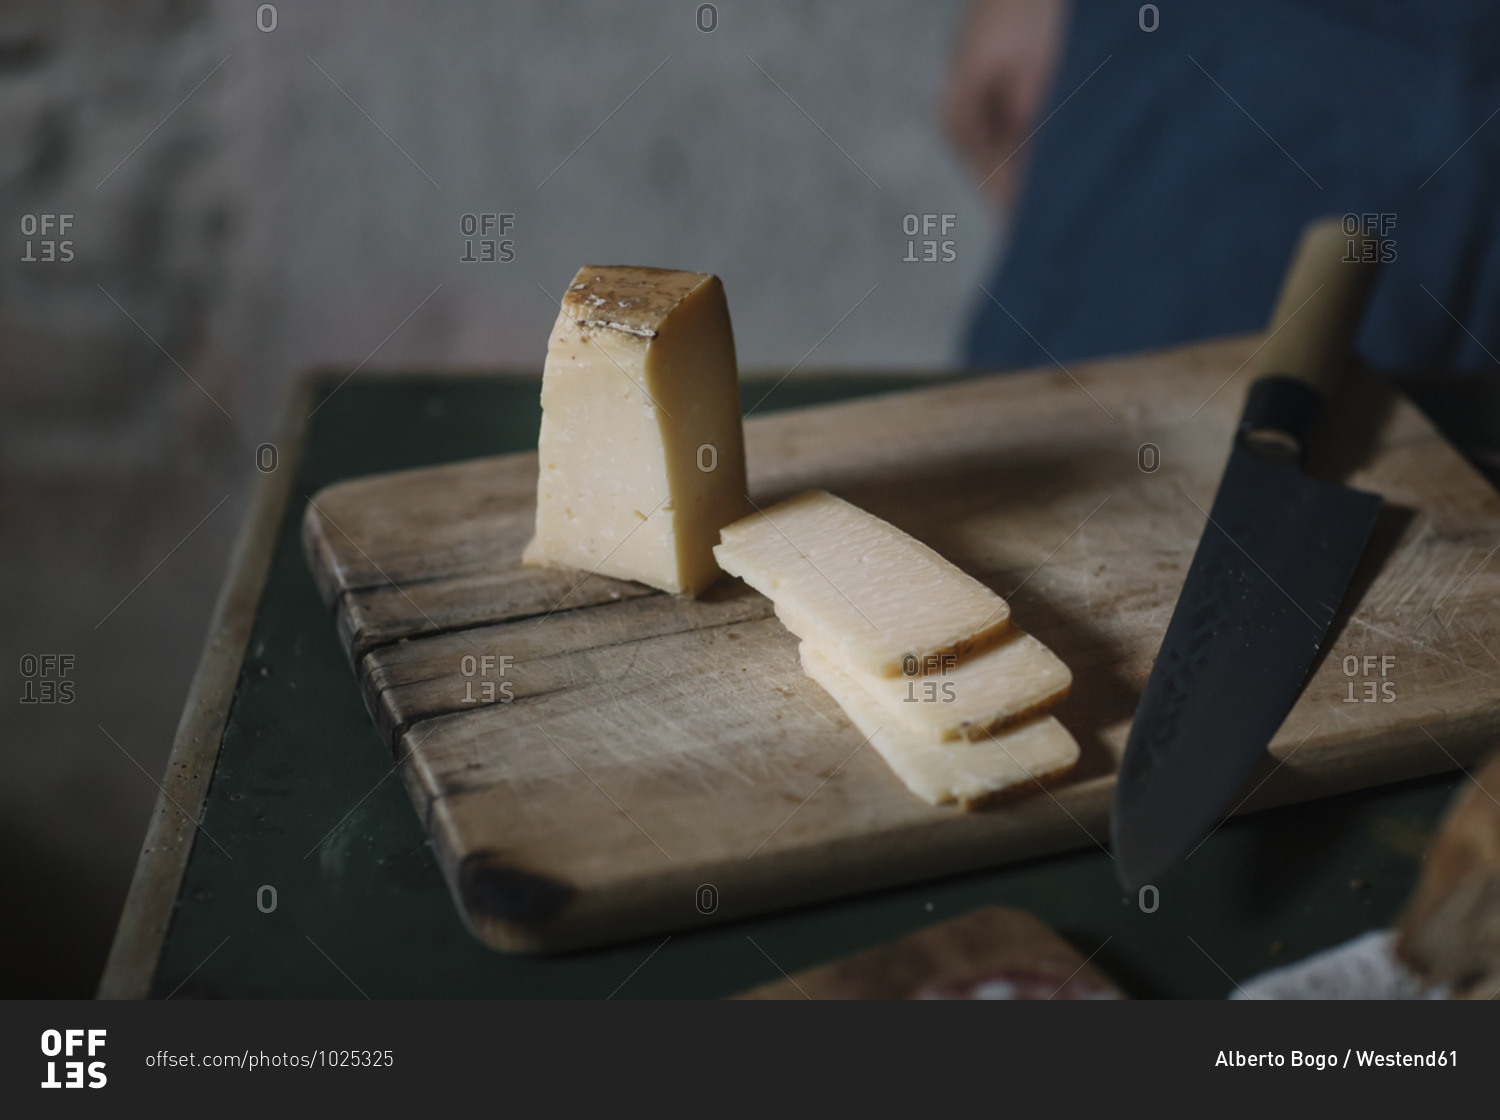 Close-up of artisanal cheese slices with knife on cutting board